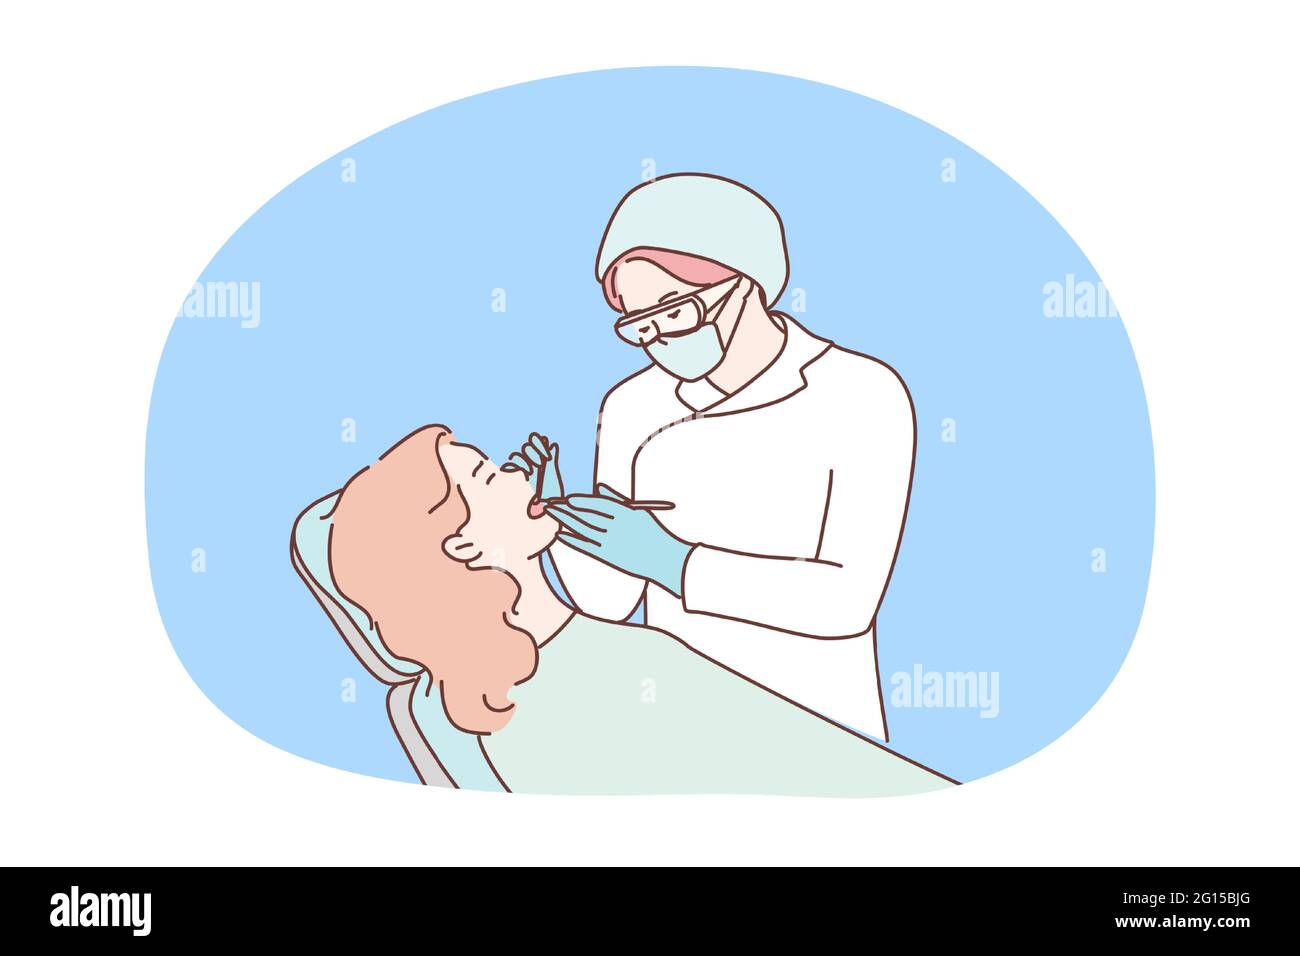 Health, care, medicine, dentistry concept. Woman doctor dentist checking examinates healing teeth of patient in special chair. Routine dental checkup procedure or toothache oral treatment illustration Stock Vector